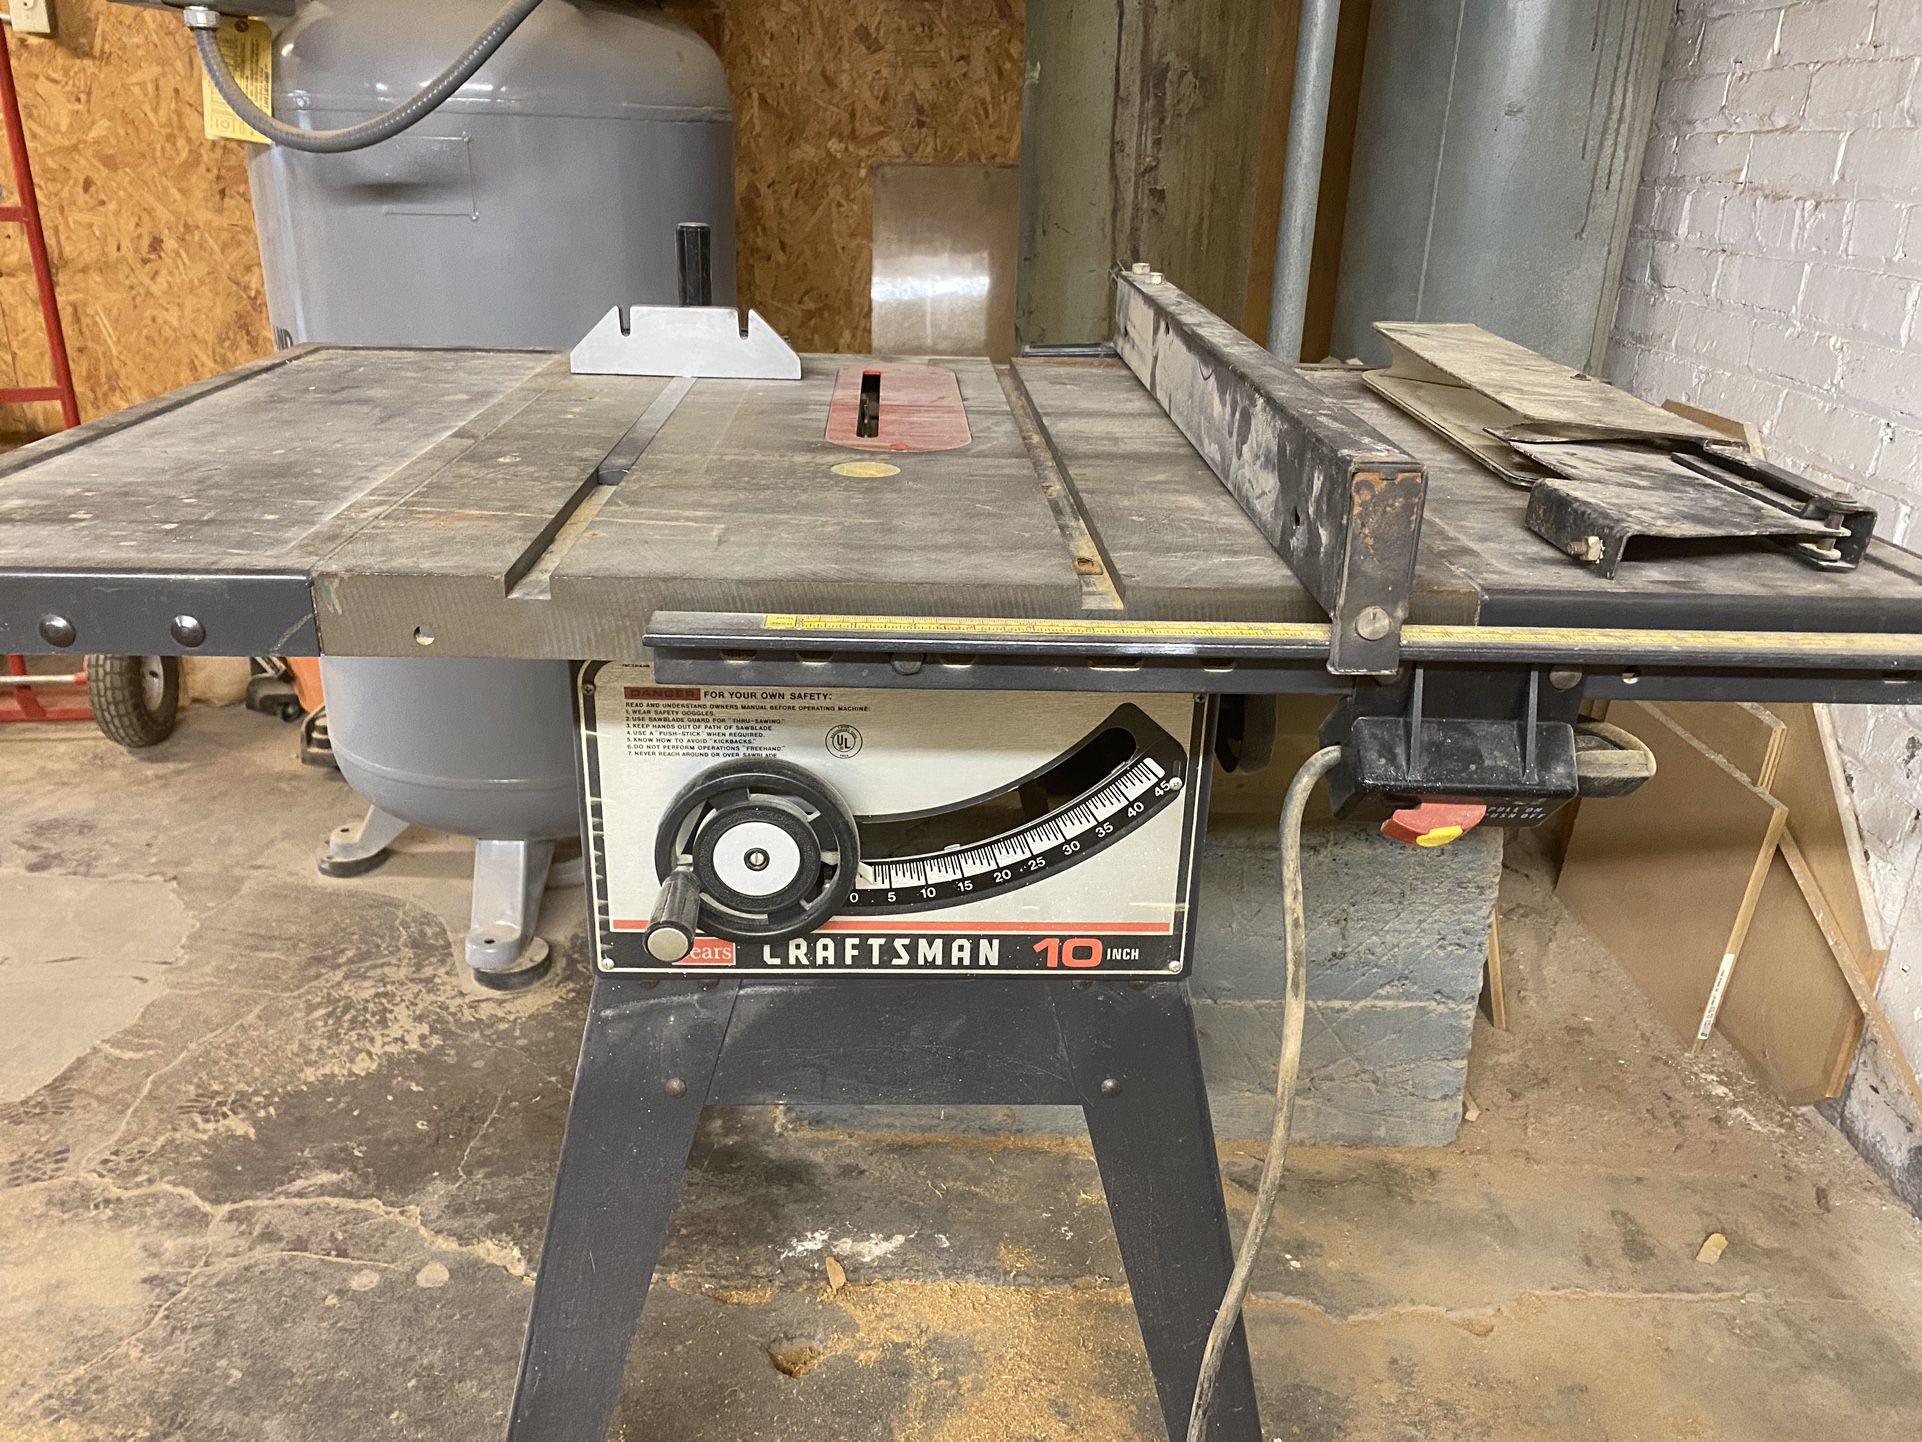 CRAFTSMAN 10” TABLE SAW W/ATTACHMENTS